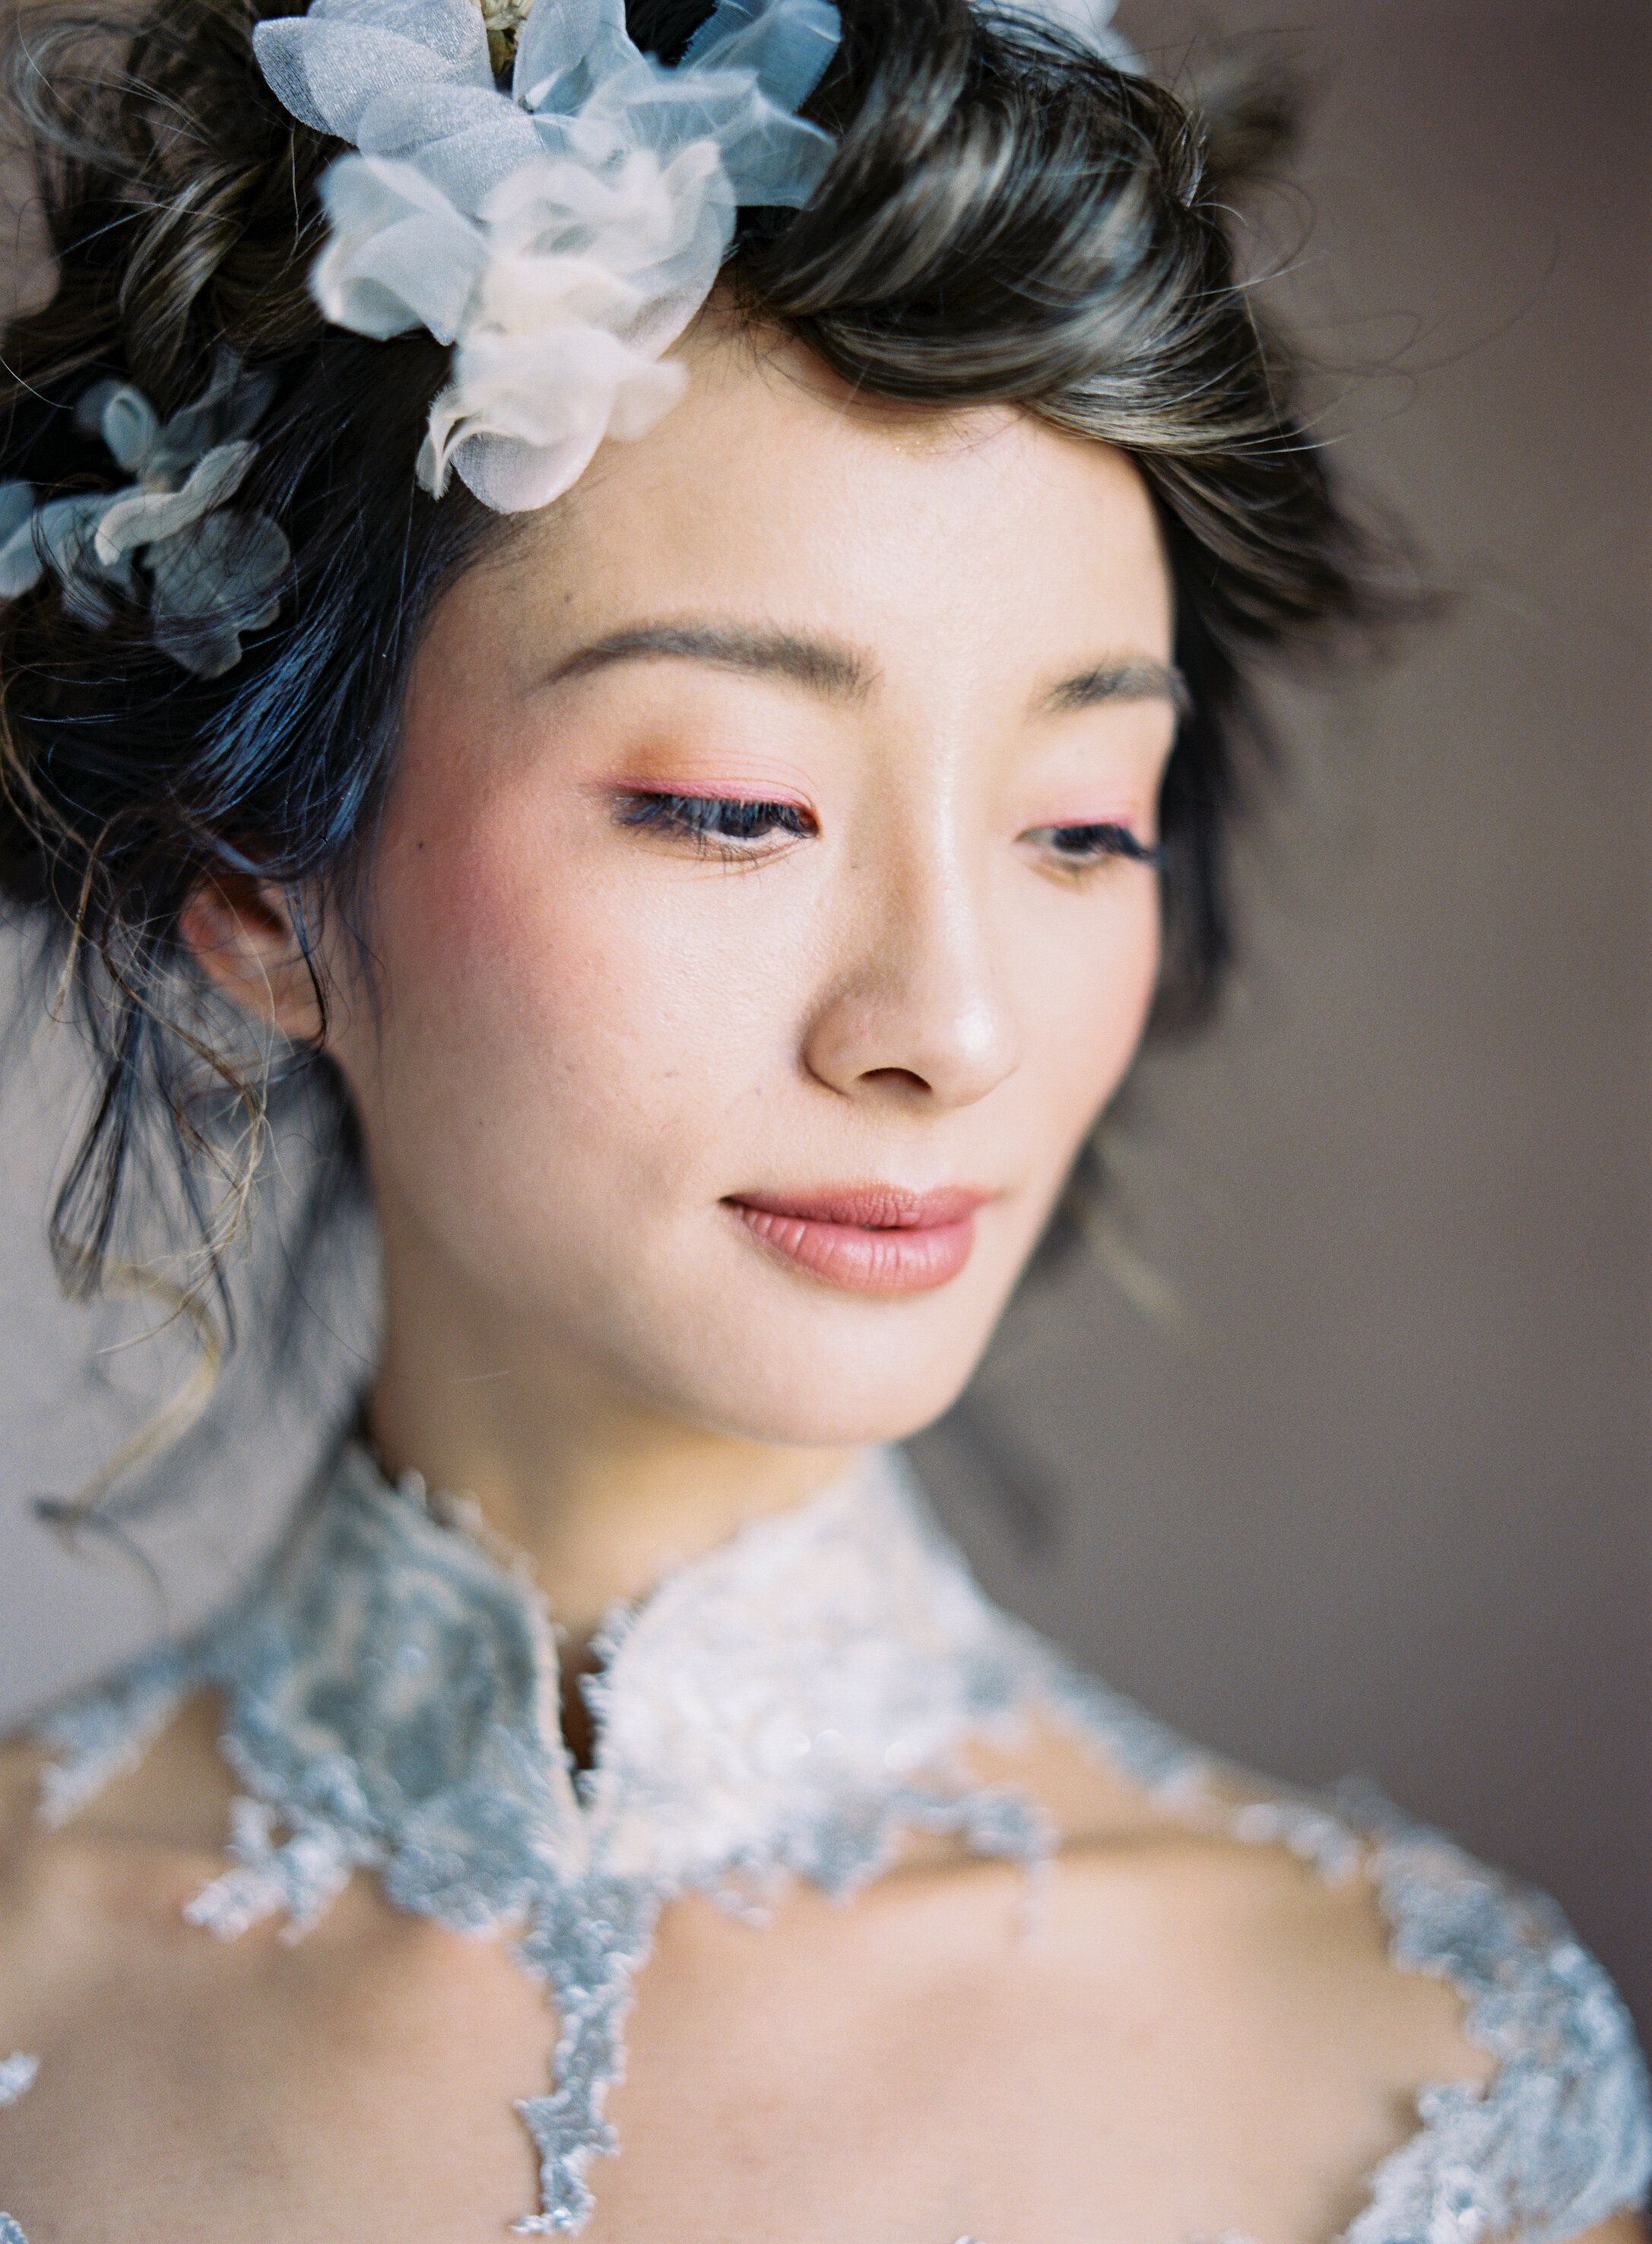 Chinese-Bride-Editorial-Selects-3-Jen_Huang-250802_002.jpg